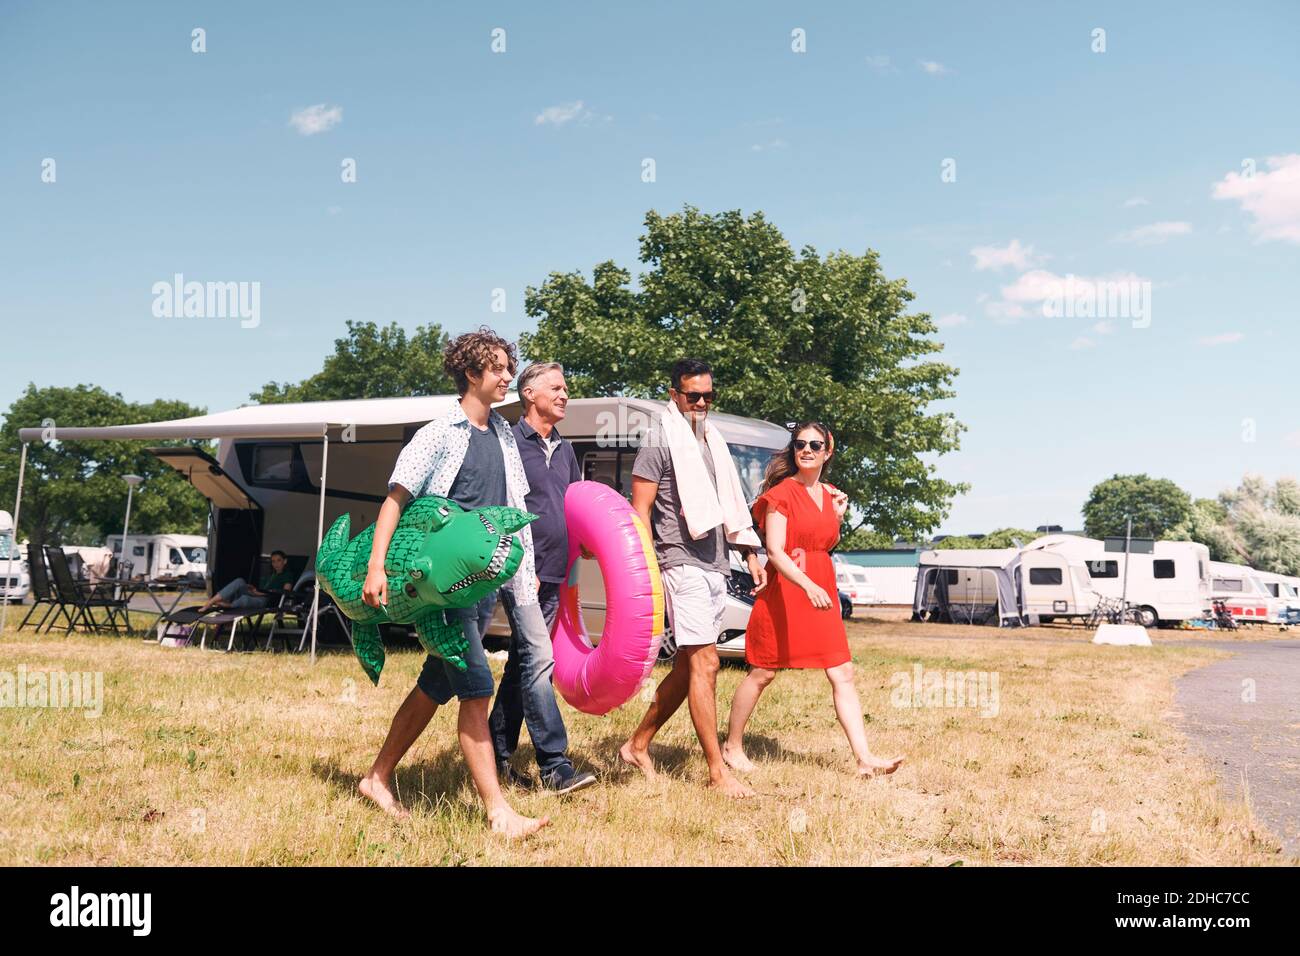 Full length of family with inflatable rings walking on grassy field against sky Stock Photo